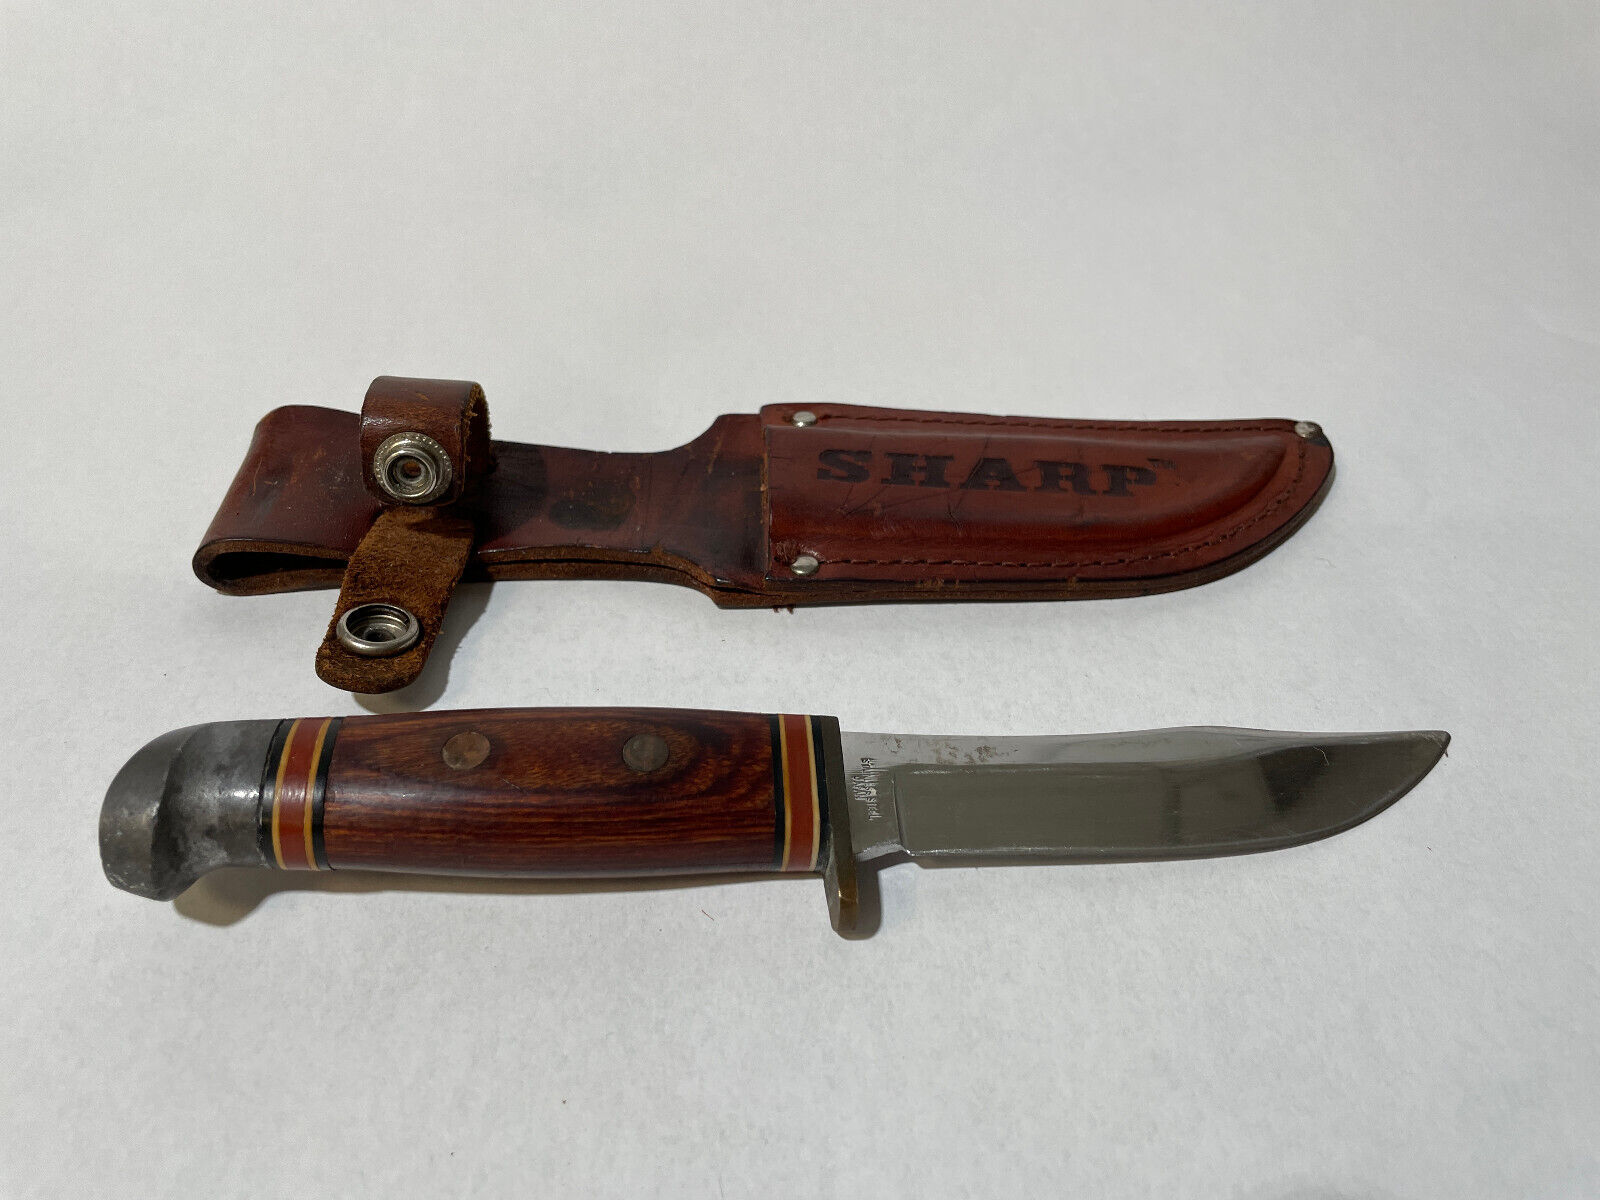 Vintage Sharp Brand Fixed Blade Hunting Knife and Leather Sheath - Japan